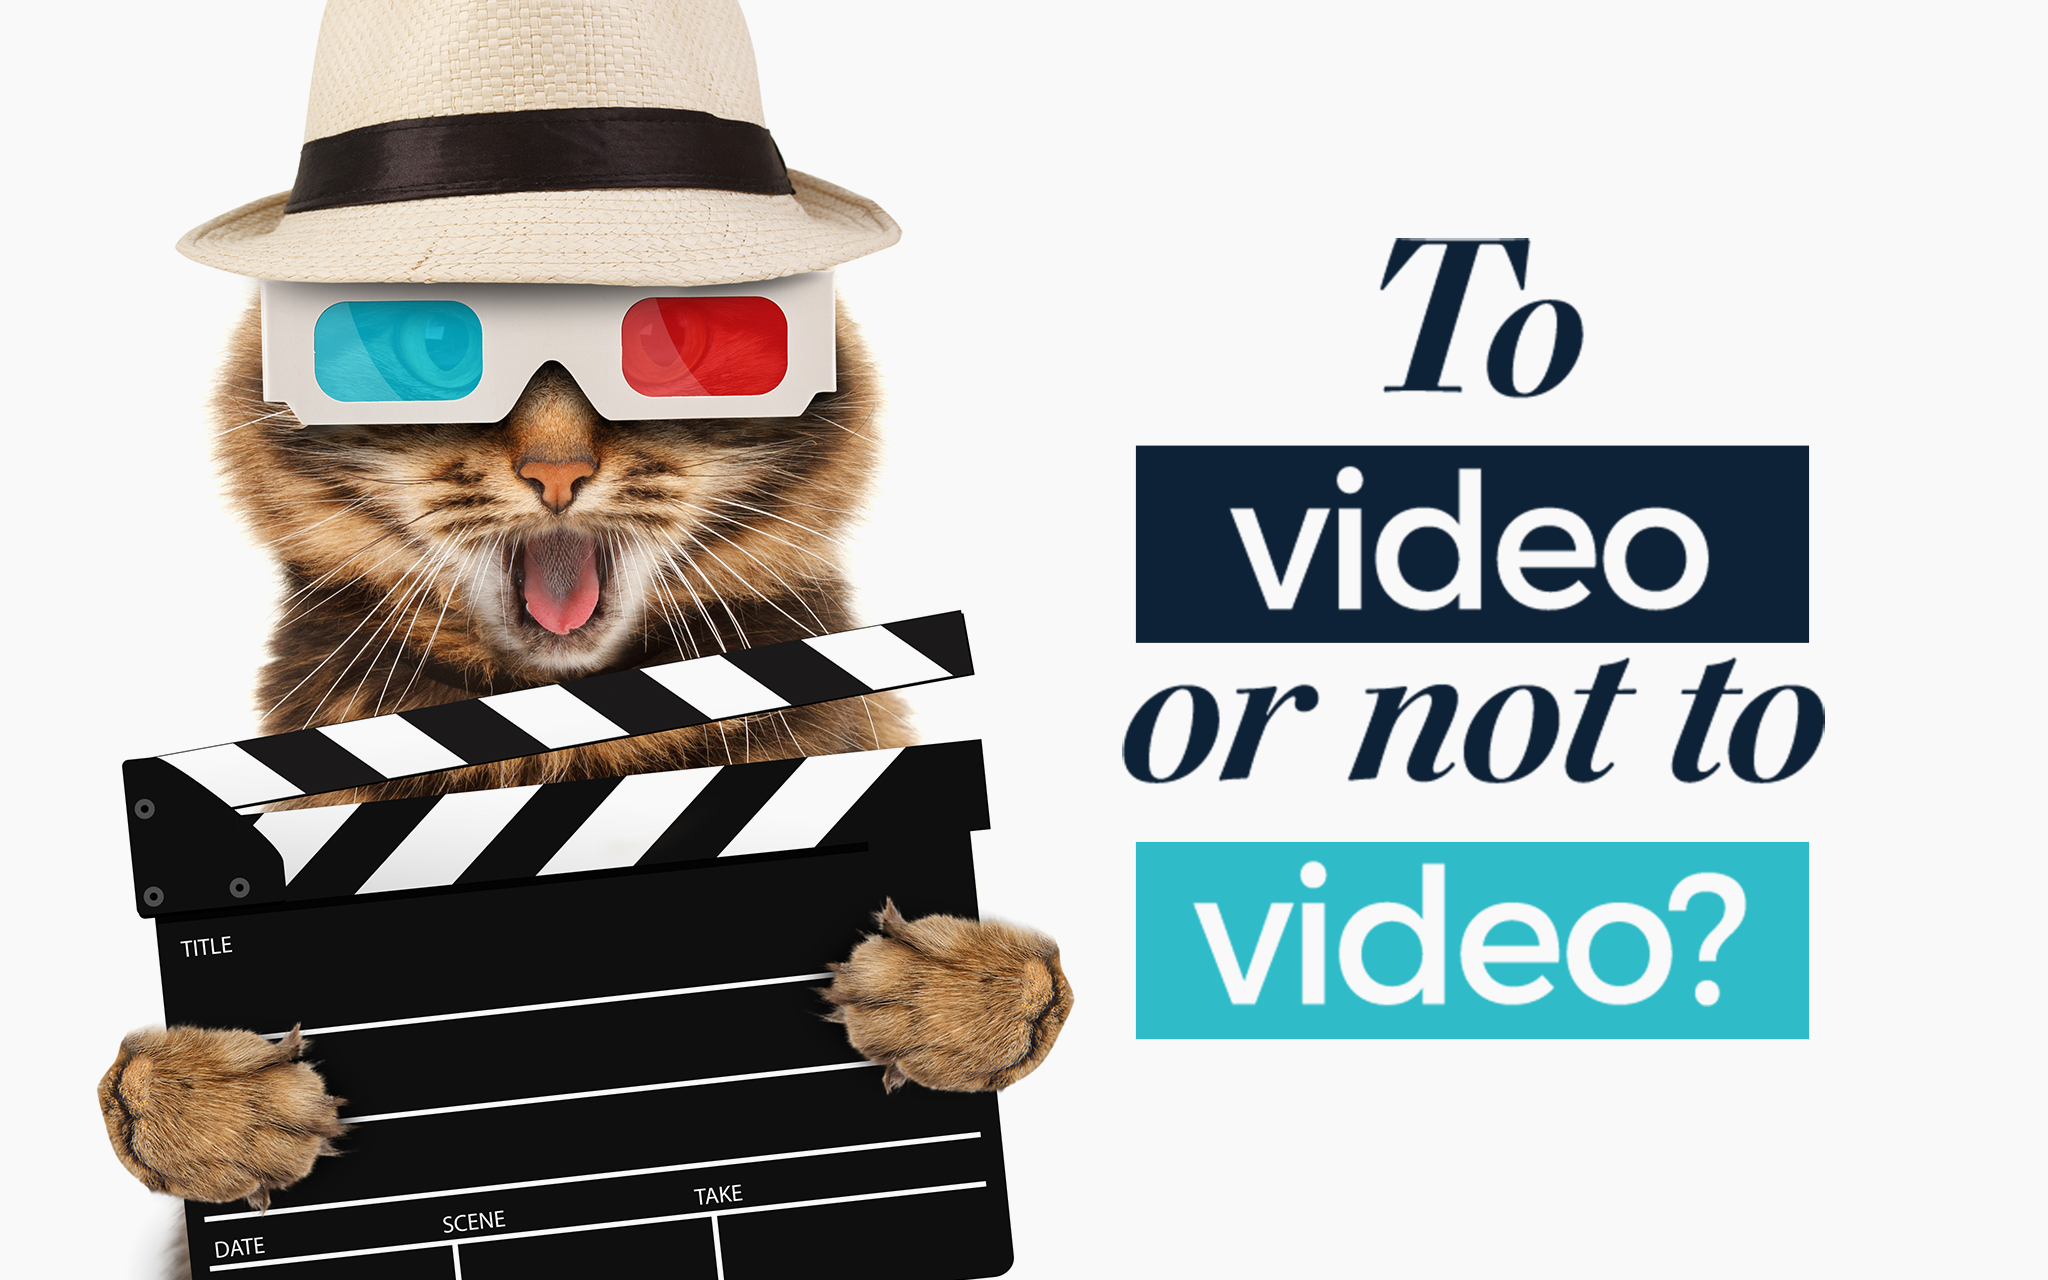 To video or not to video